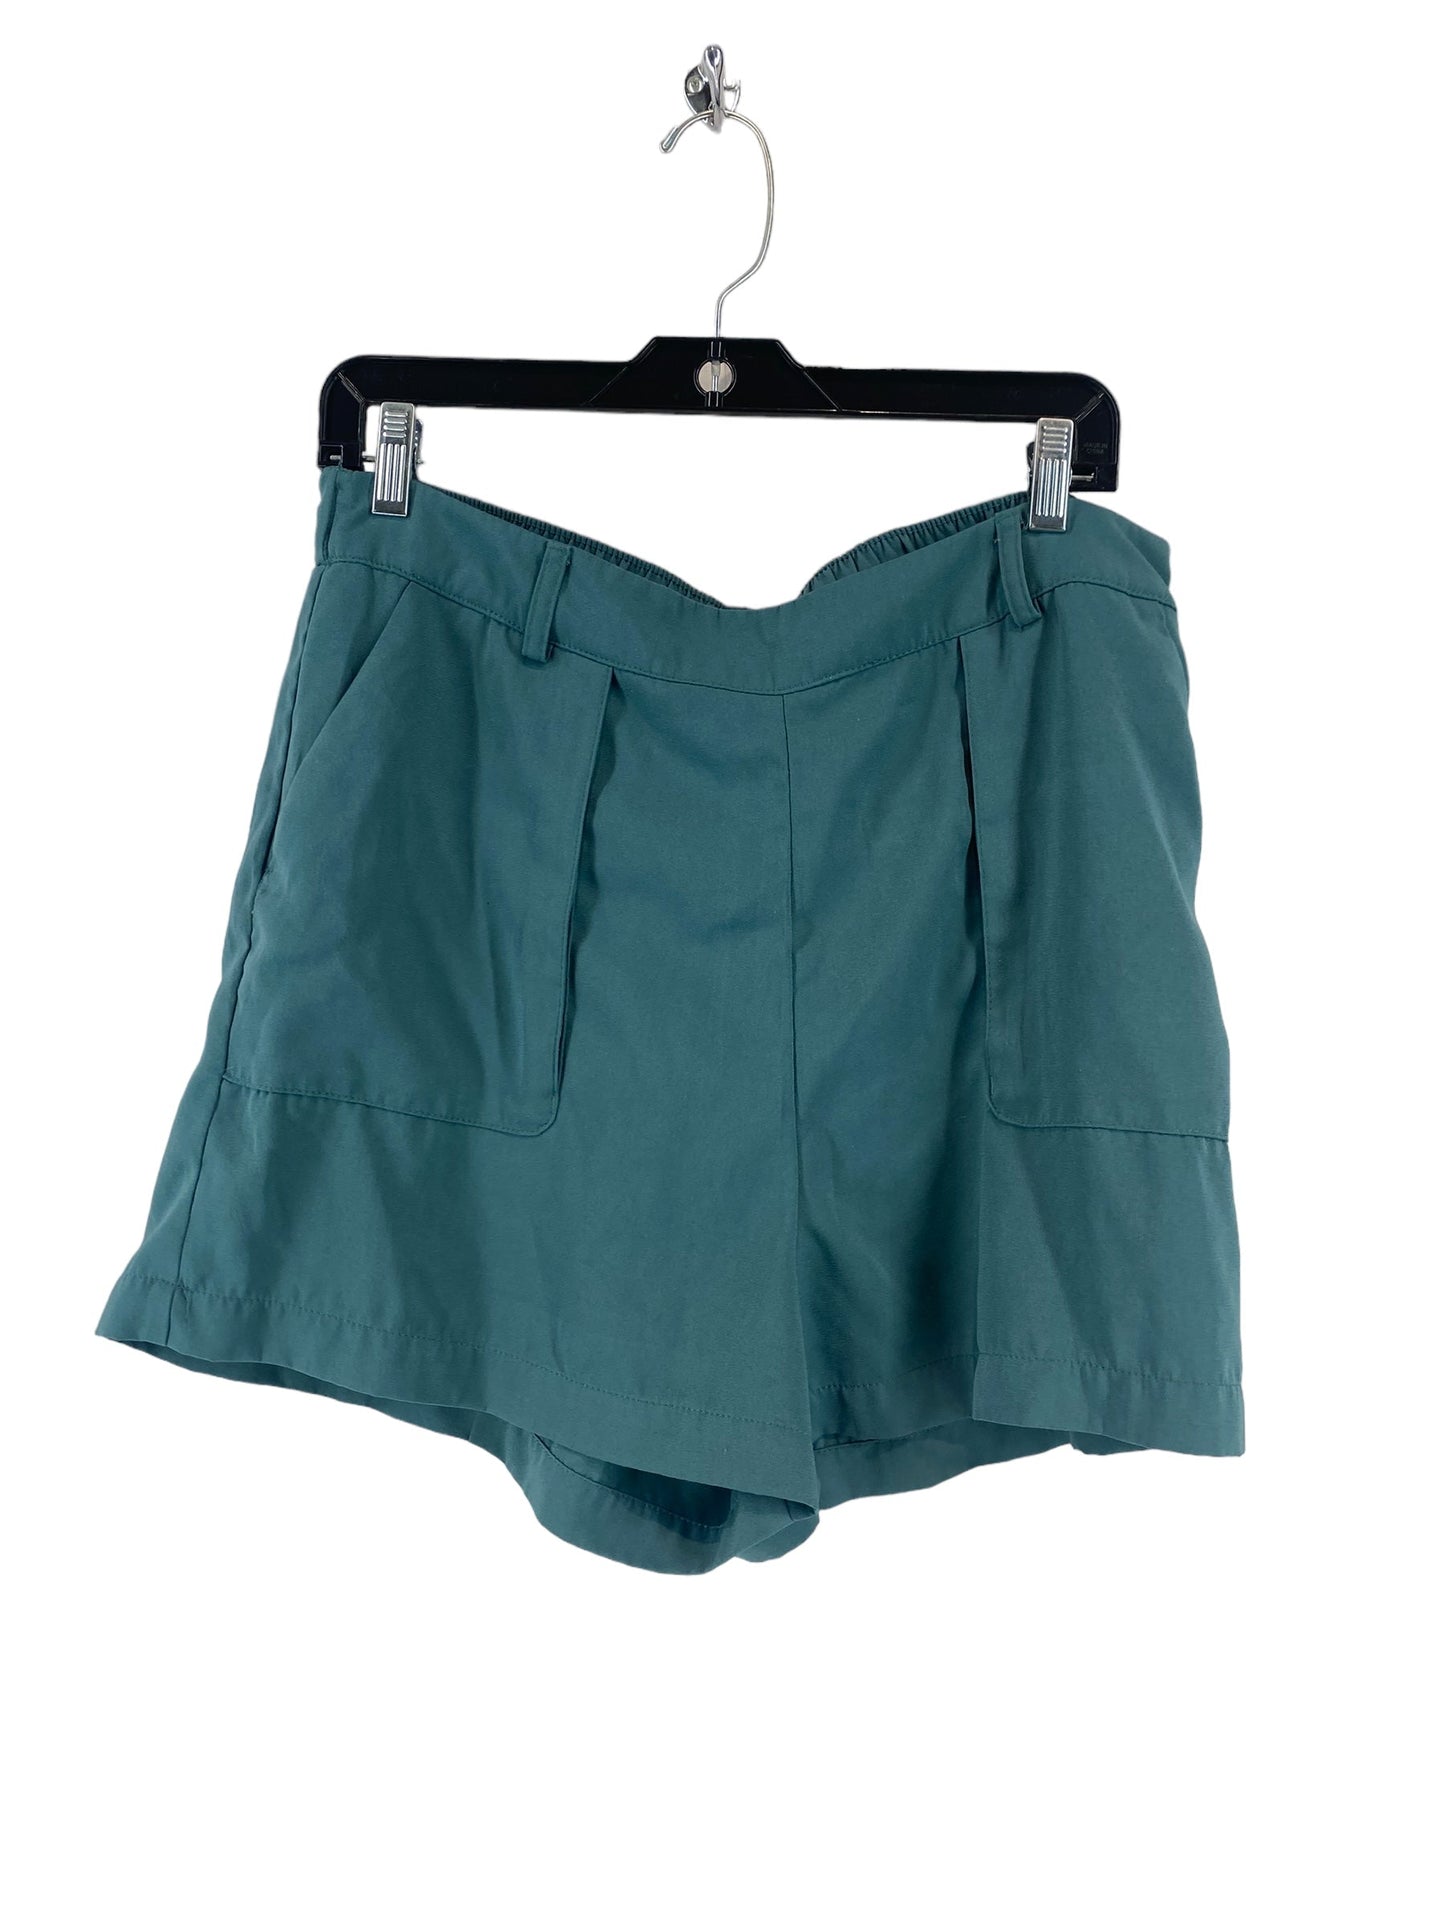 Green Shorts A New Day, Size L